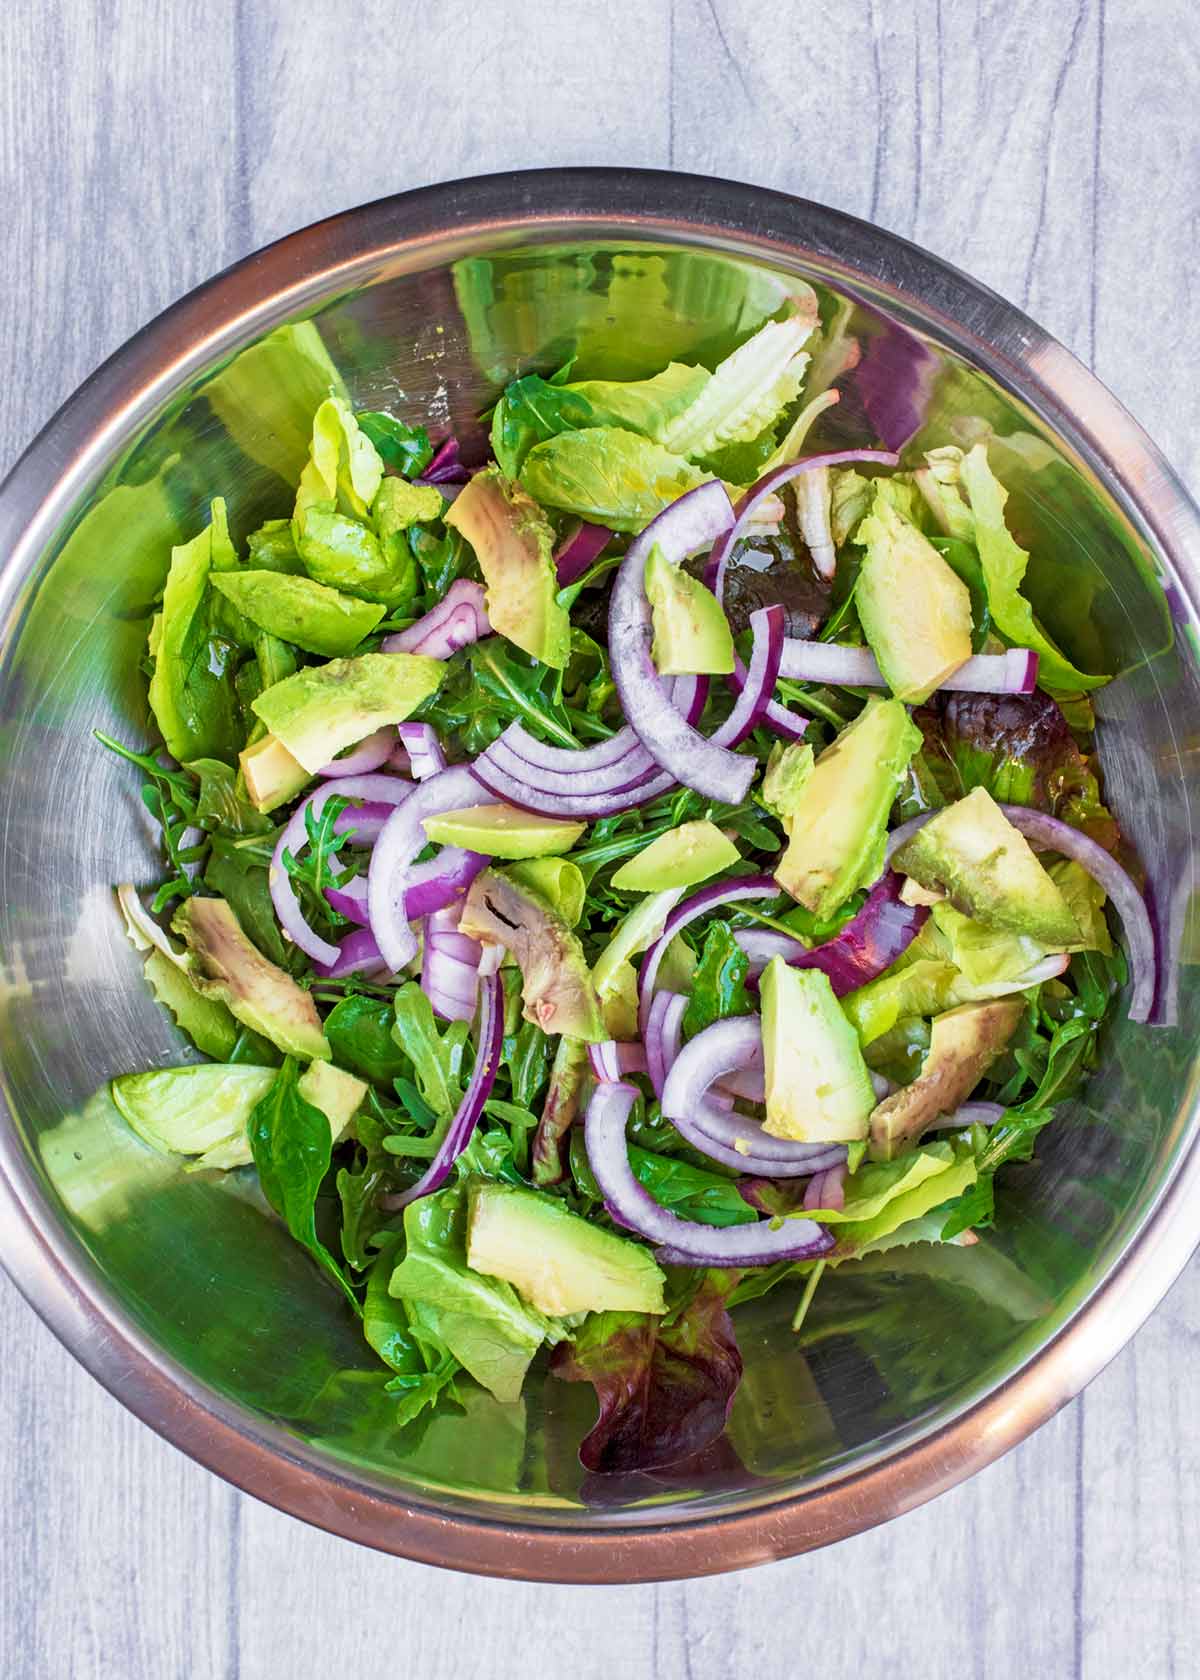 A large mixing bowl containing lettuce leaves, sliced onion and avocado.